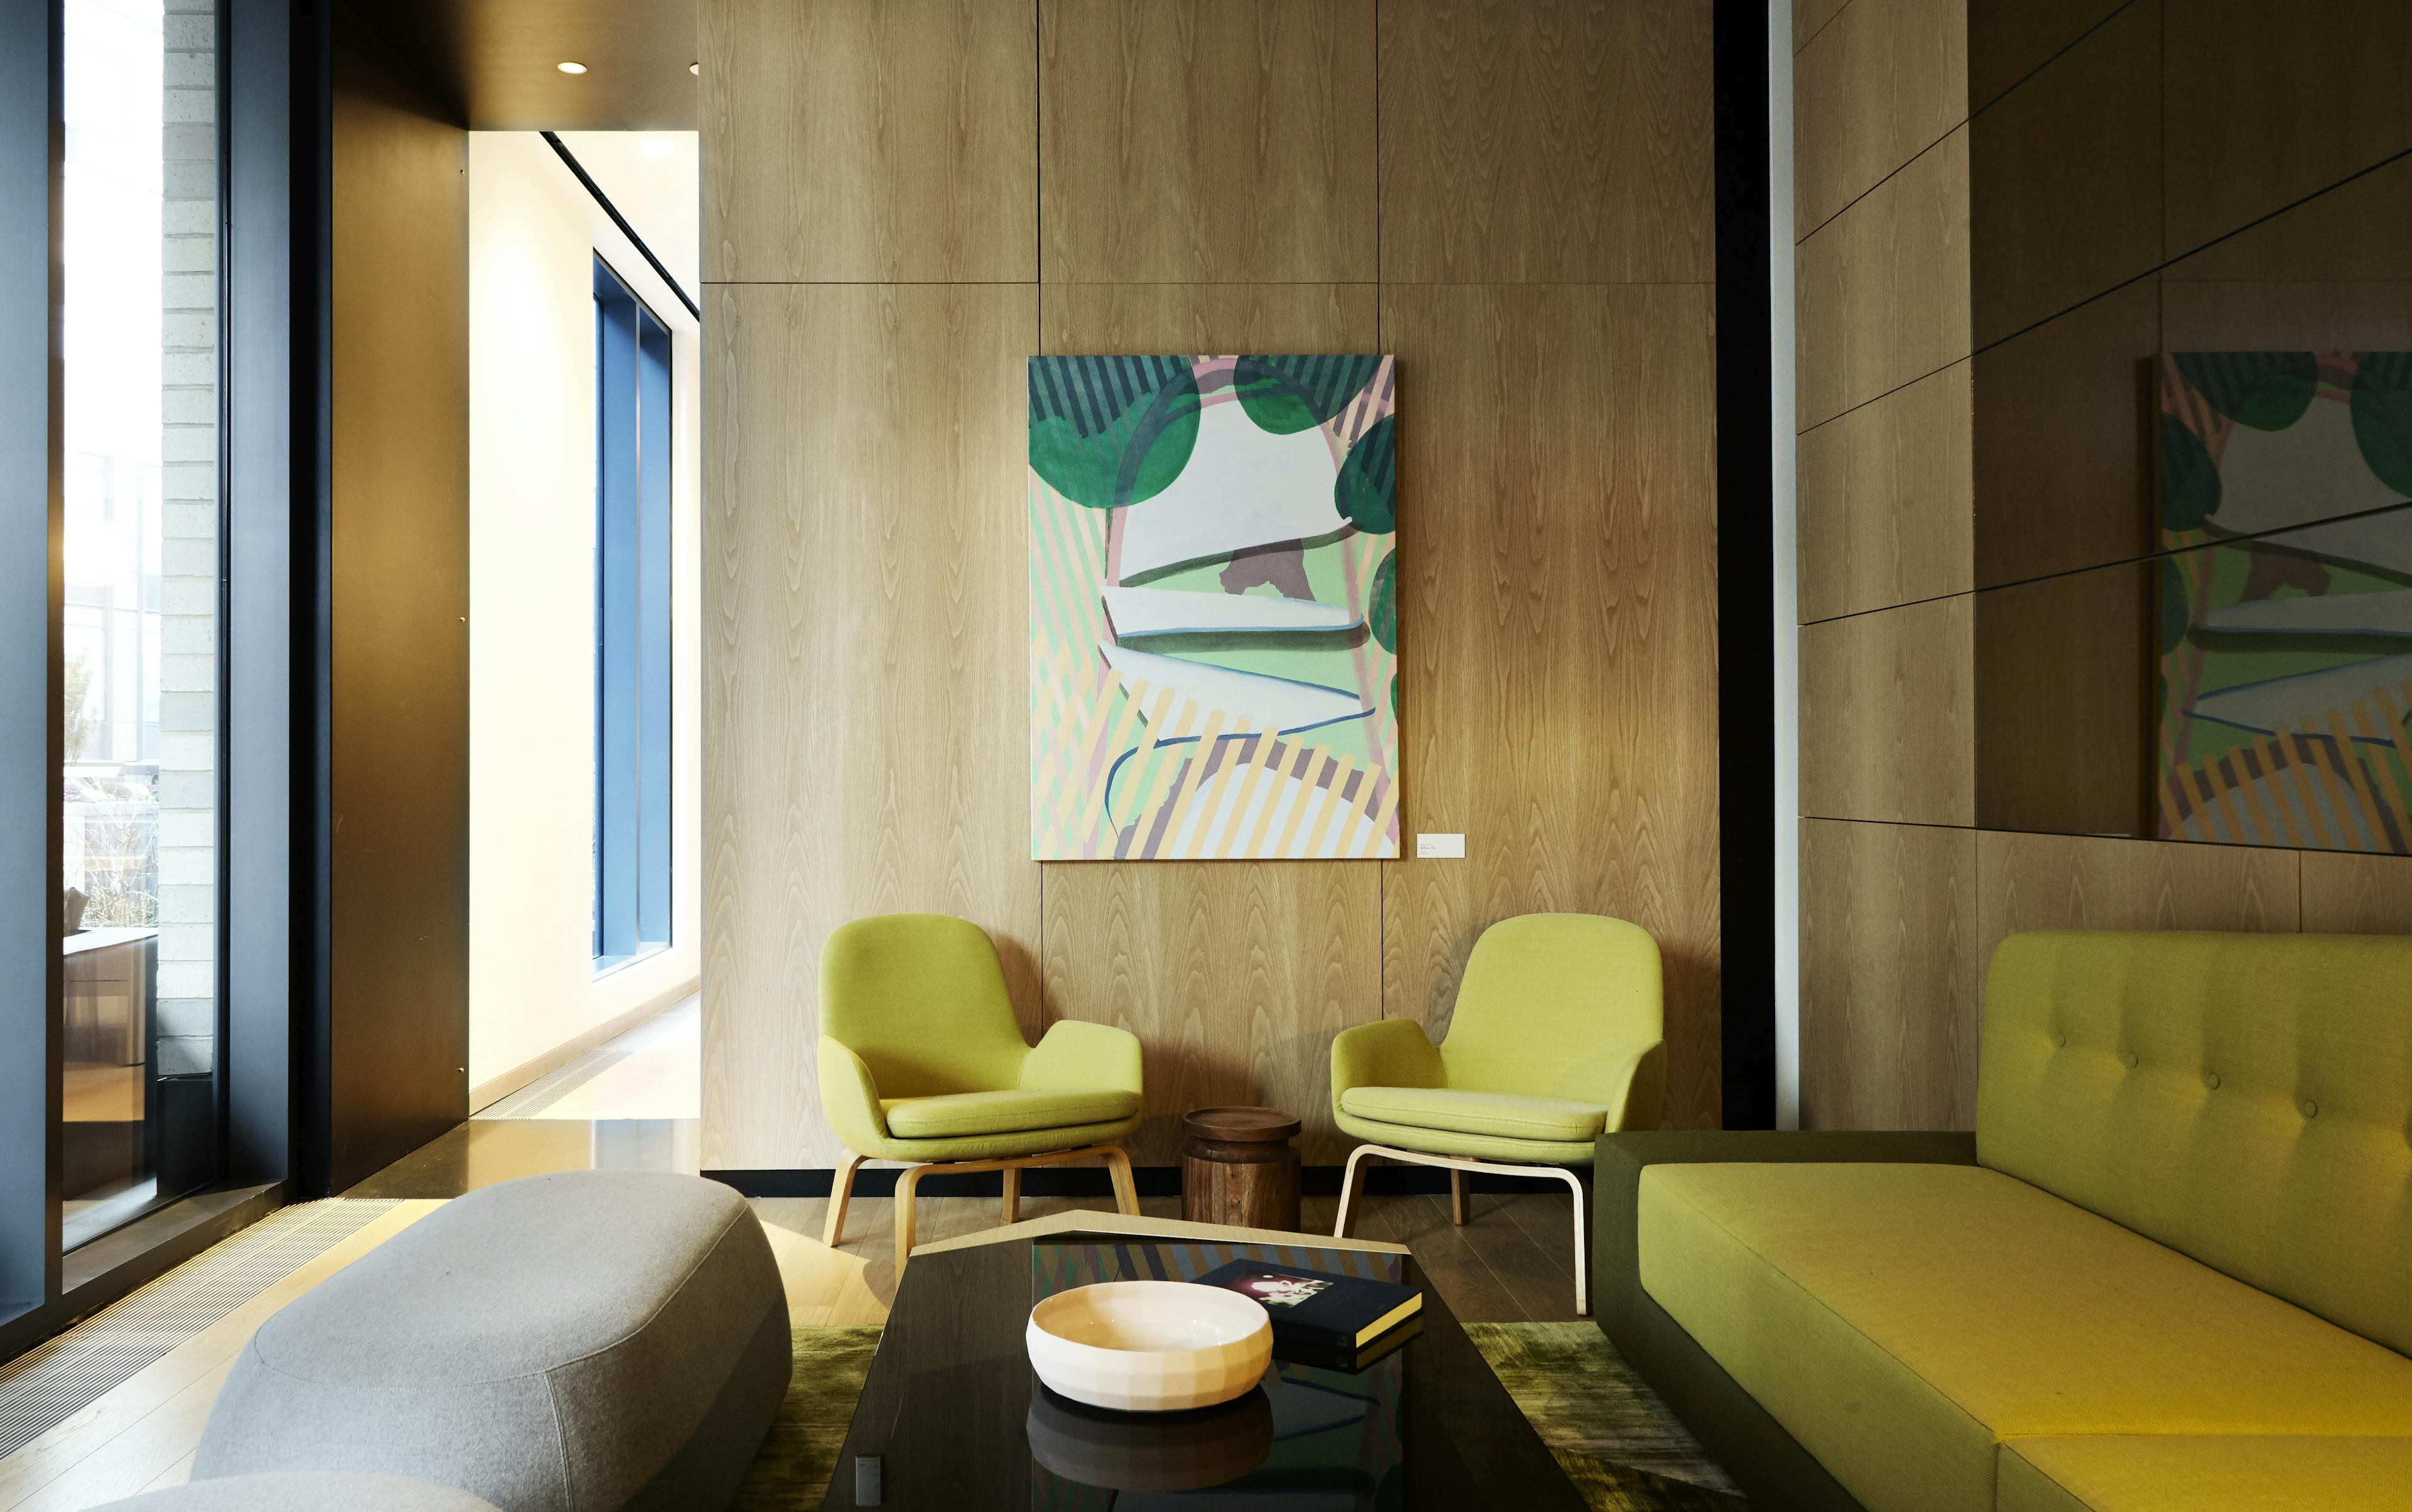 Green abstract painting with striated lines by artist Amelia Midori Miller on a wood wall within a lounge area with lime green arm chairs and a lime green sofa.